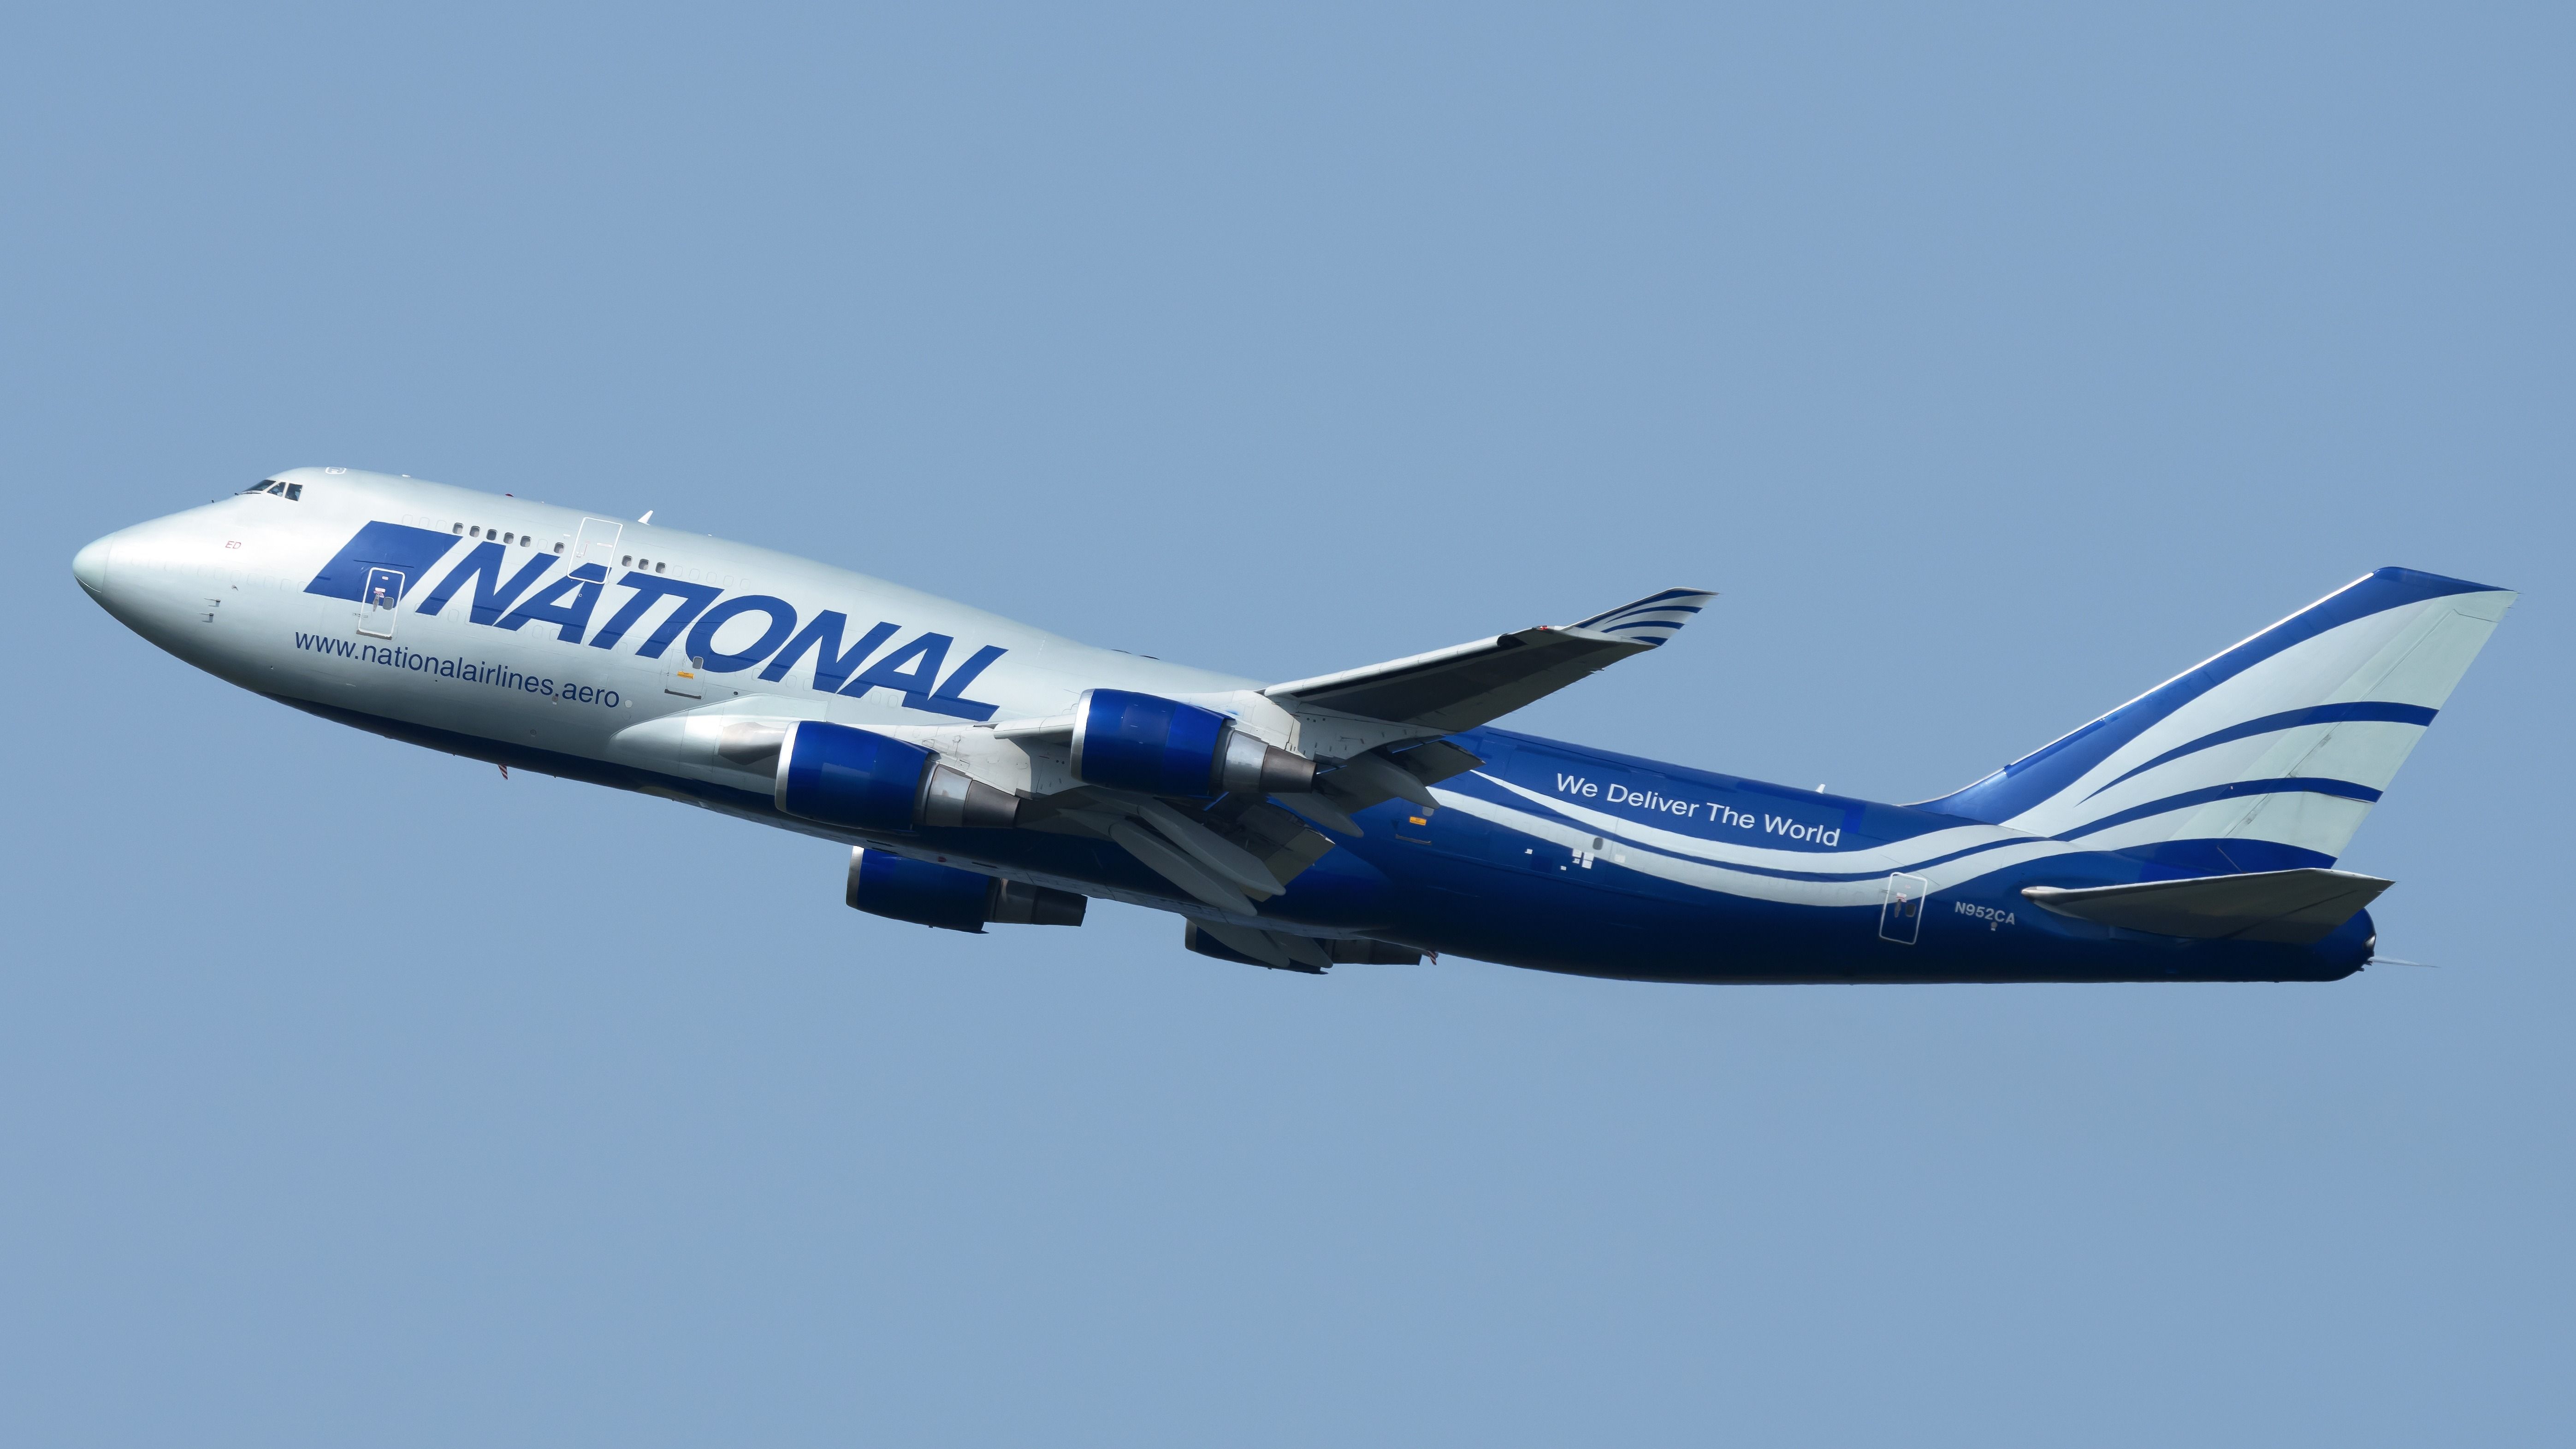 National Airlines Boeing 747-400 